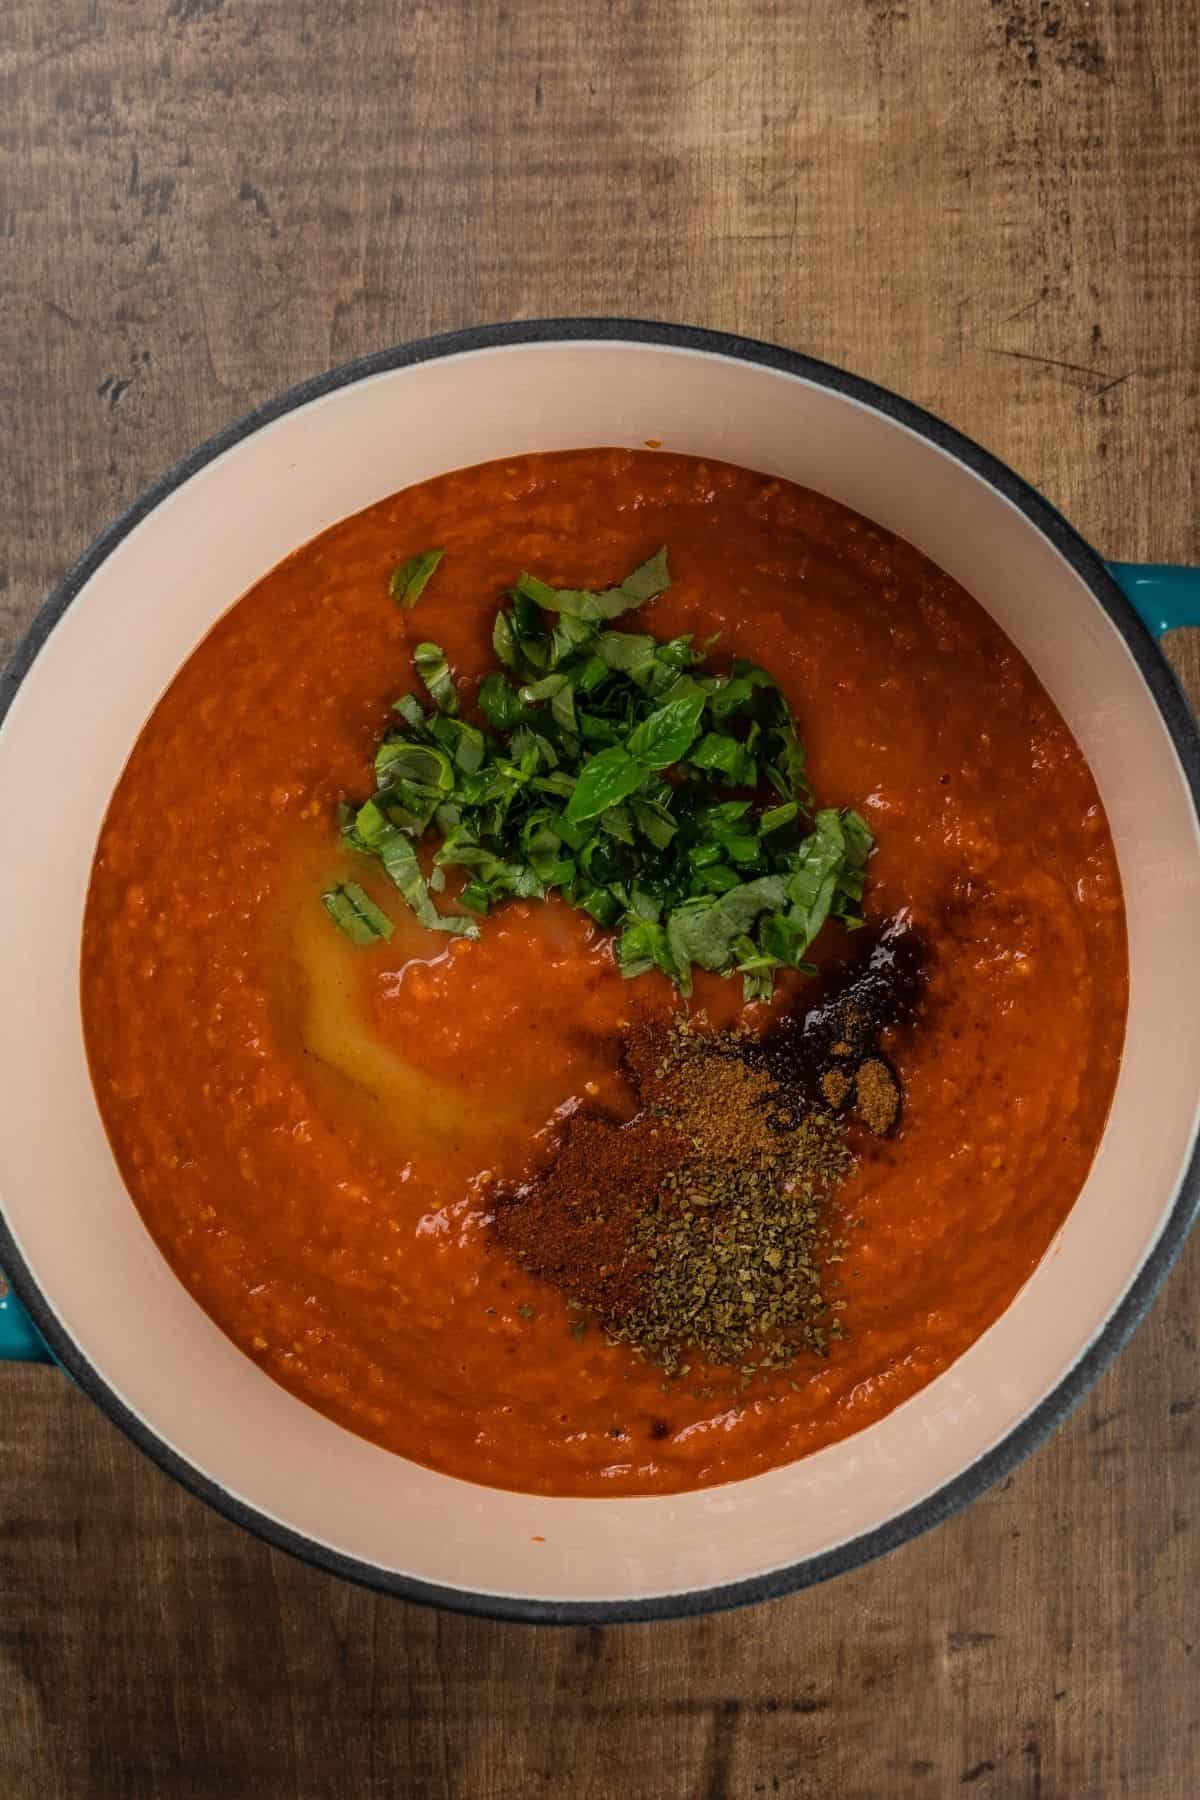 A large ceramic cooking pot is filled with the tomato soup and the fresh herbs and spices have been added on top before cooking.